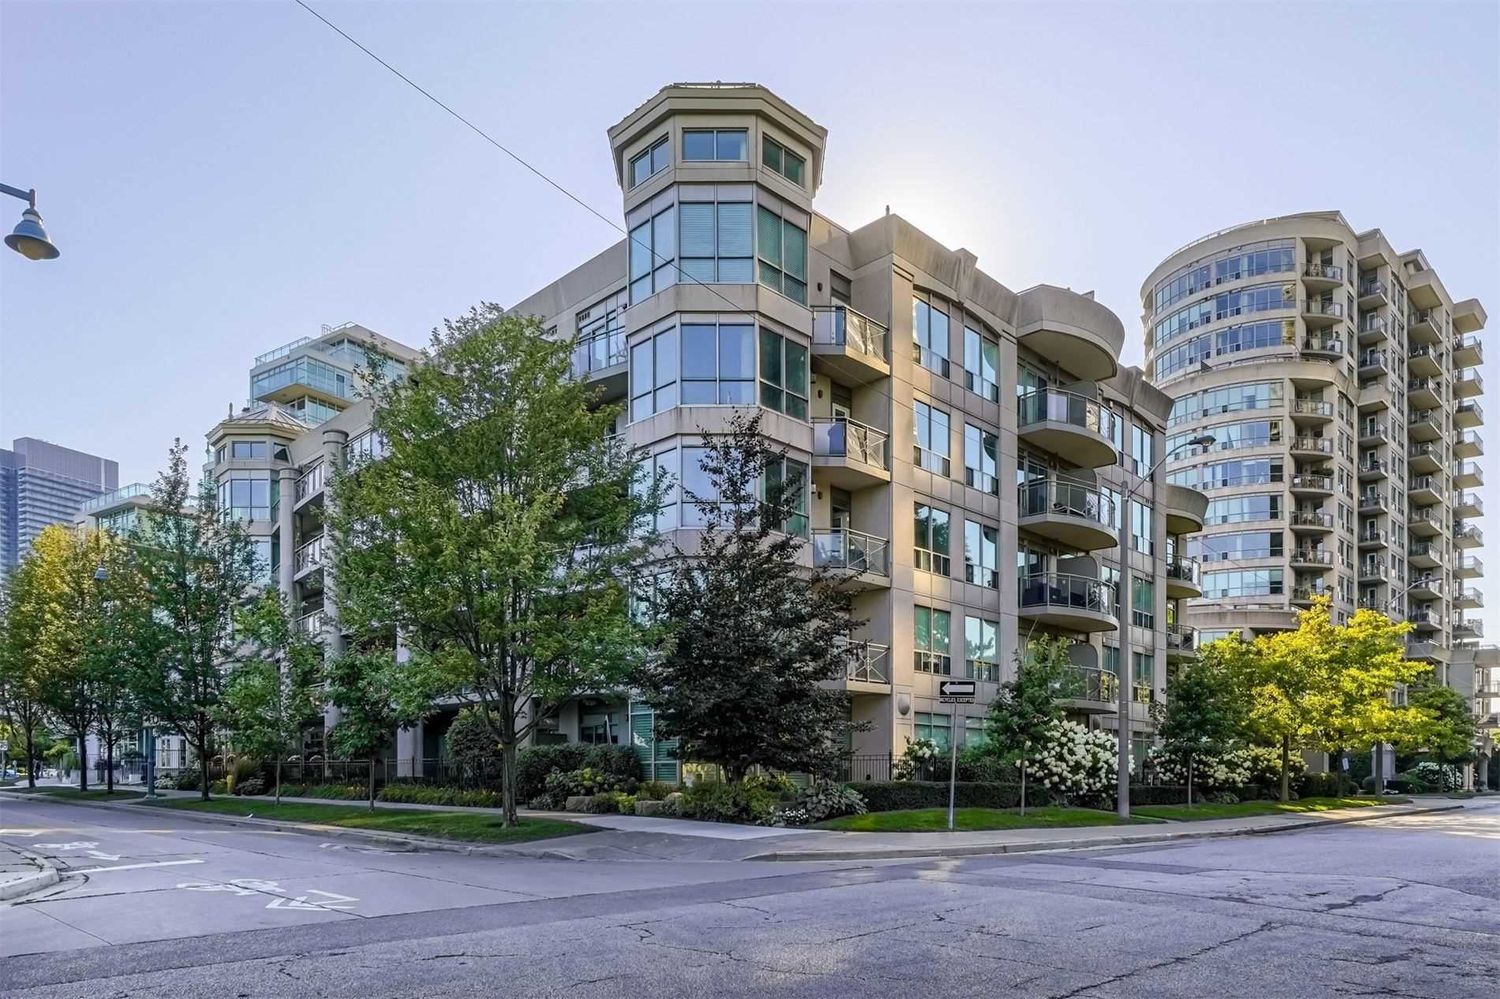 80 Palace Pier Court. Nevis Condos is located in  Etobicoke, Toronto - image #1 of 3